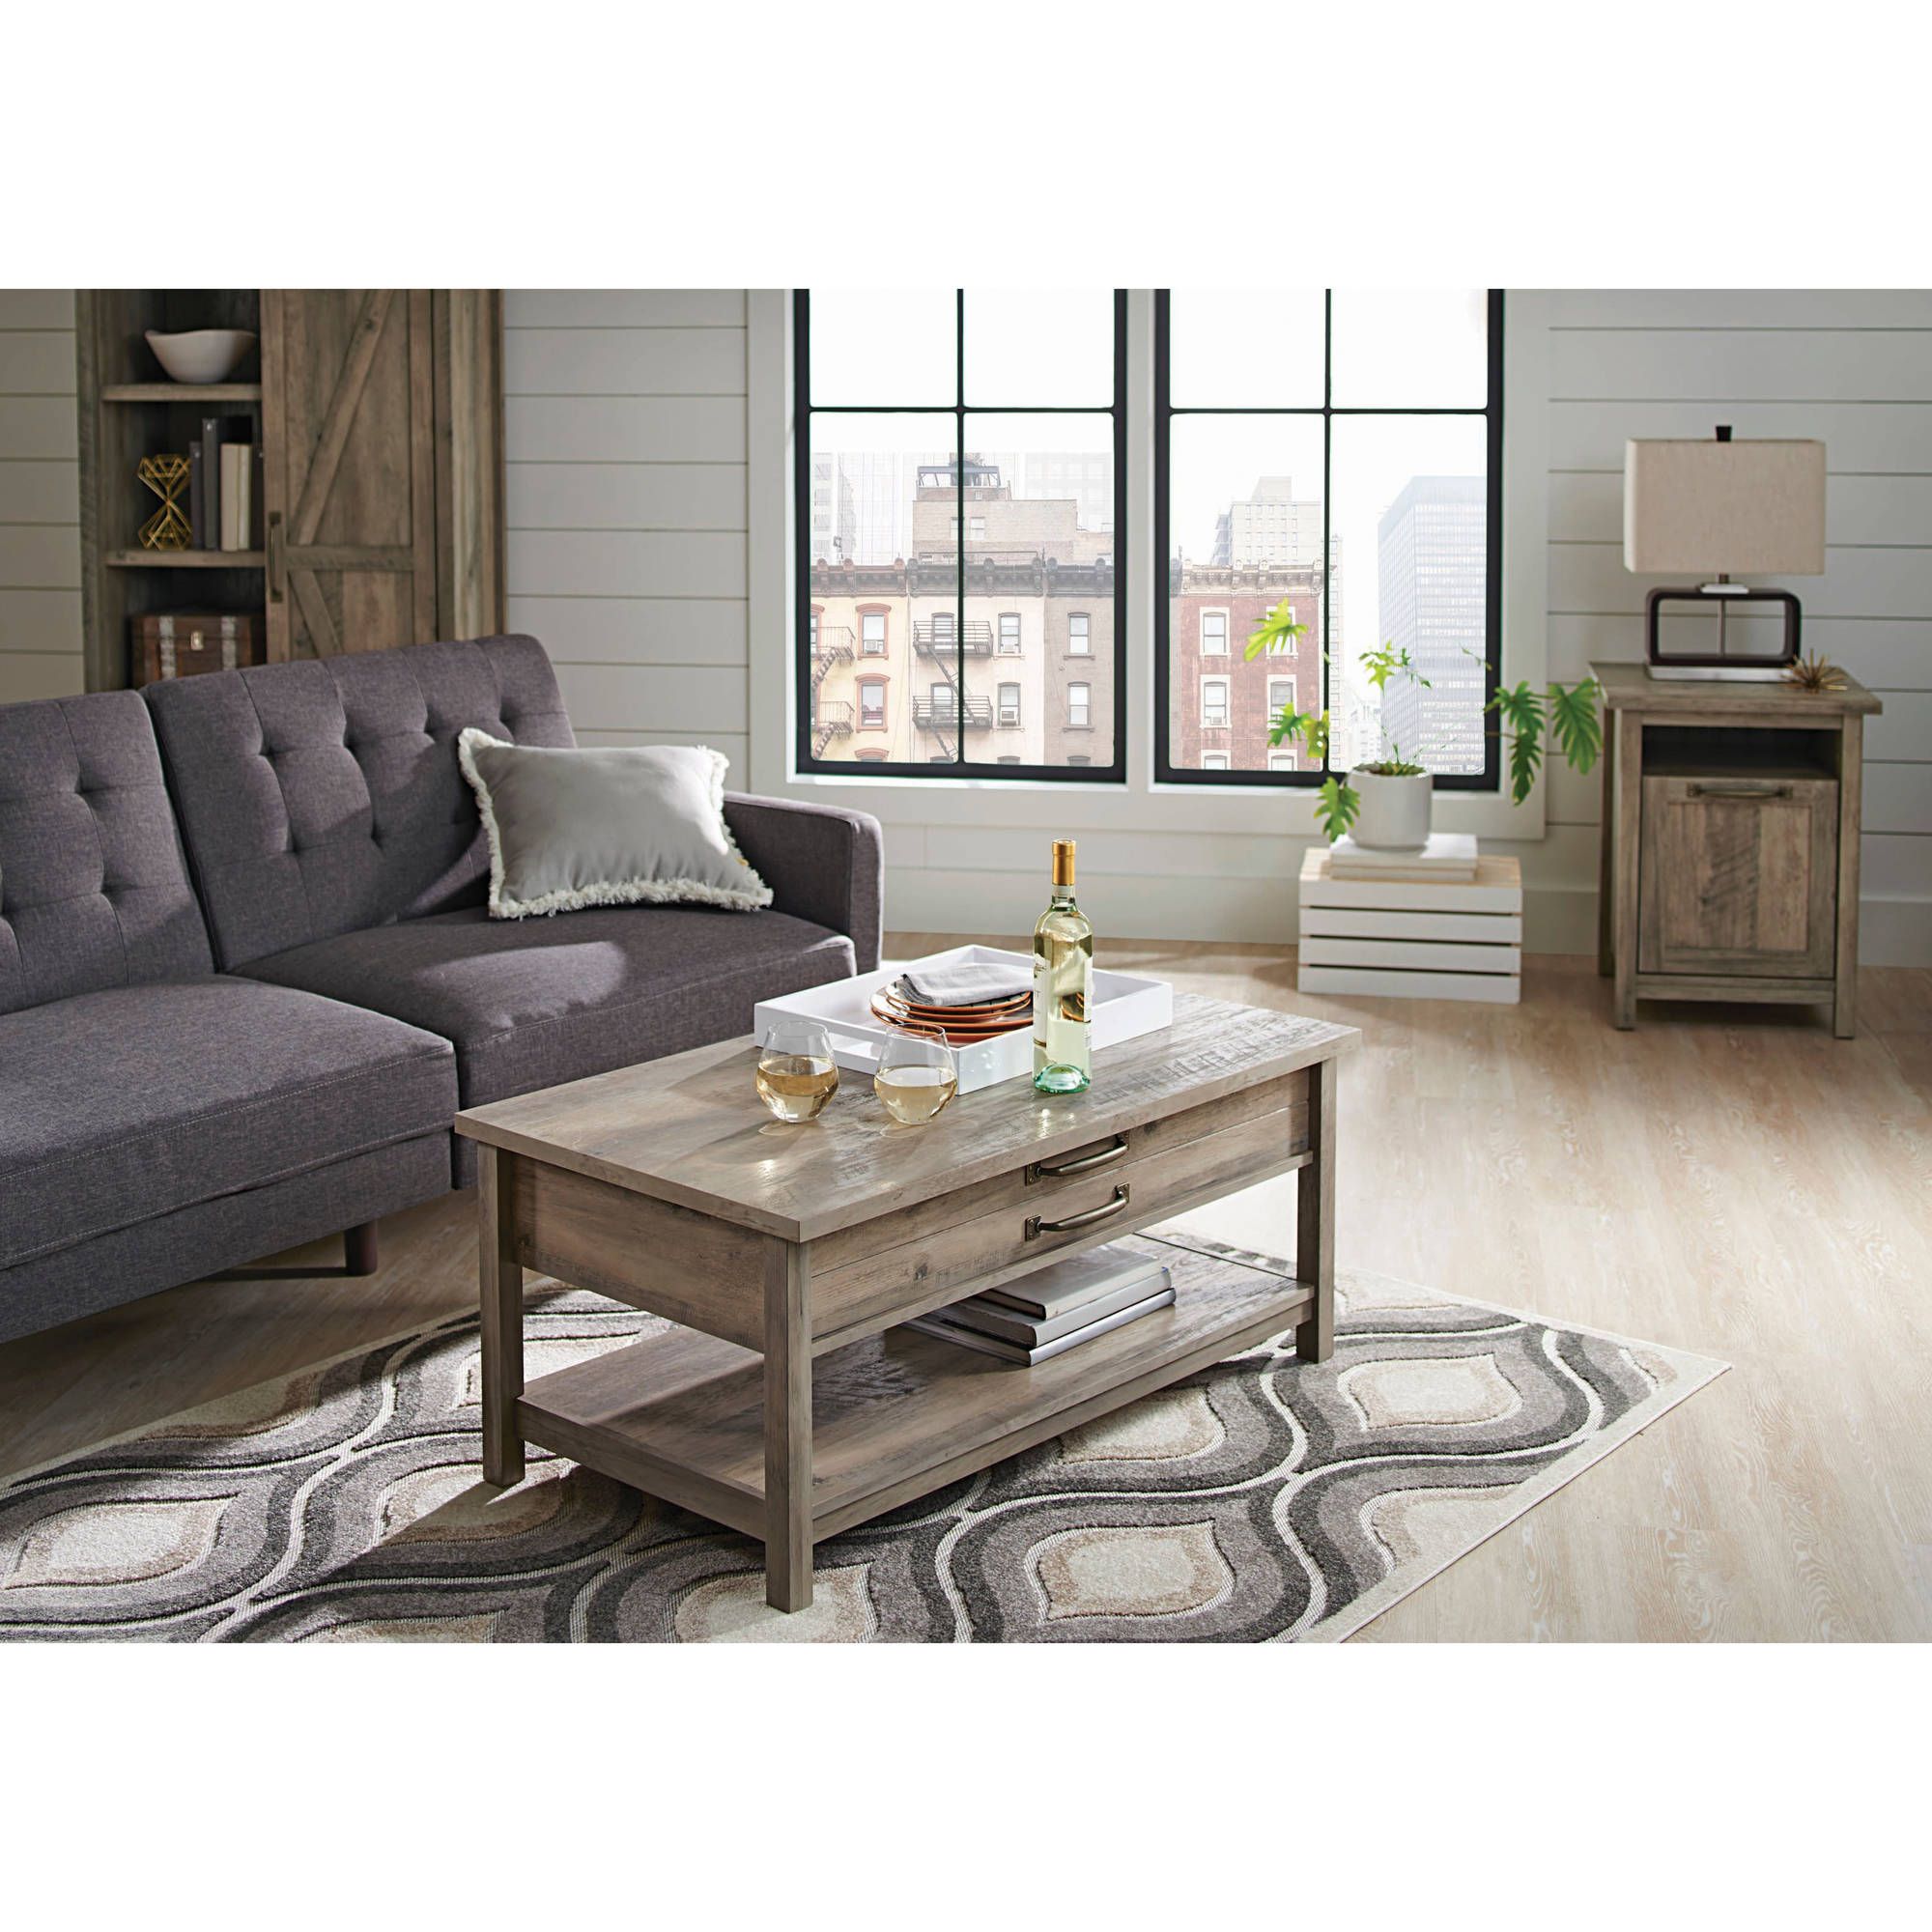 Better Homes & Gardens Modern Farmhouse Rectangle Lift-Top Coffee Table, Rustic Gray Finish - image 5 of 13